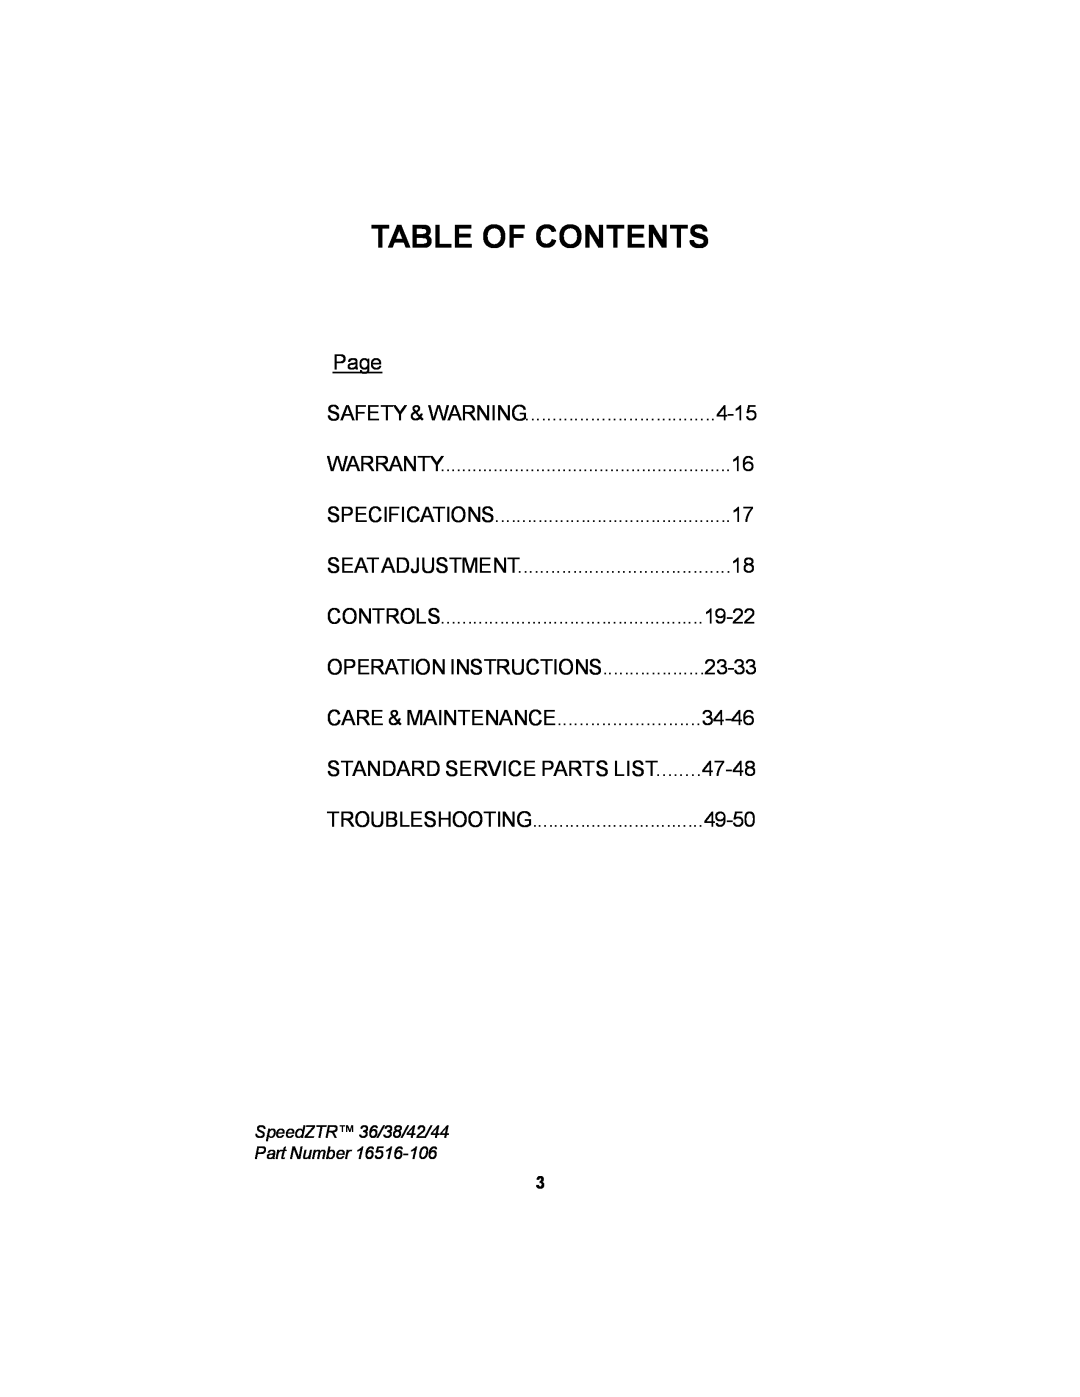 Dixon 36 manual Table Of Contents, Page, 4-15, Controls, 19-22, 23-33, Care & Maintenance, 47-48, Troubleshooting, 49-50 